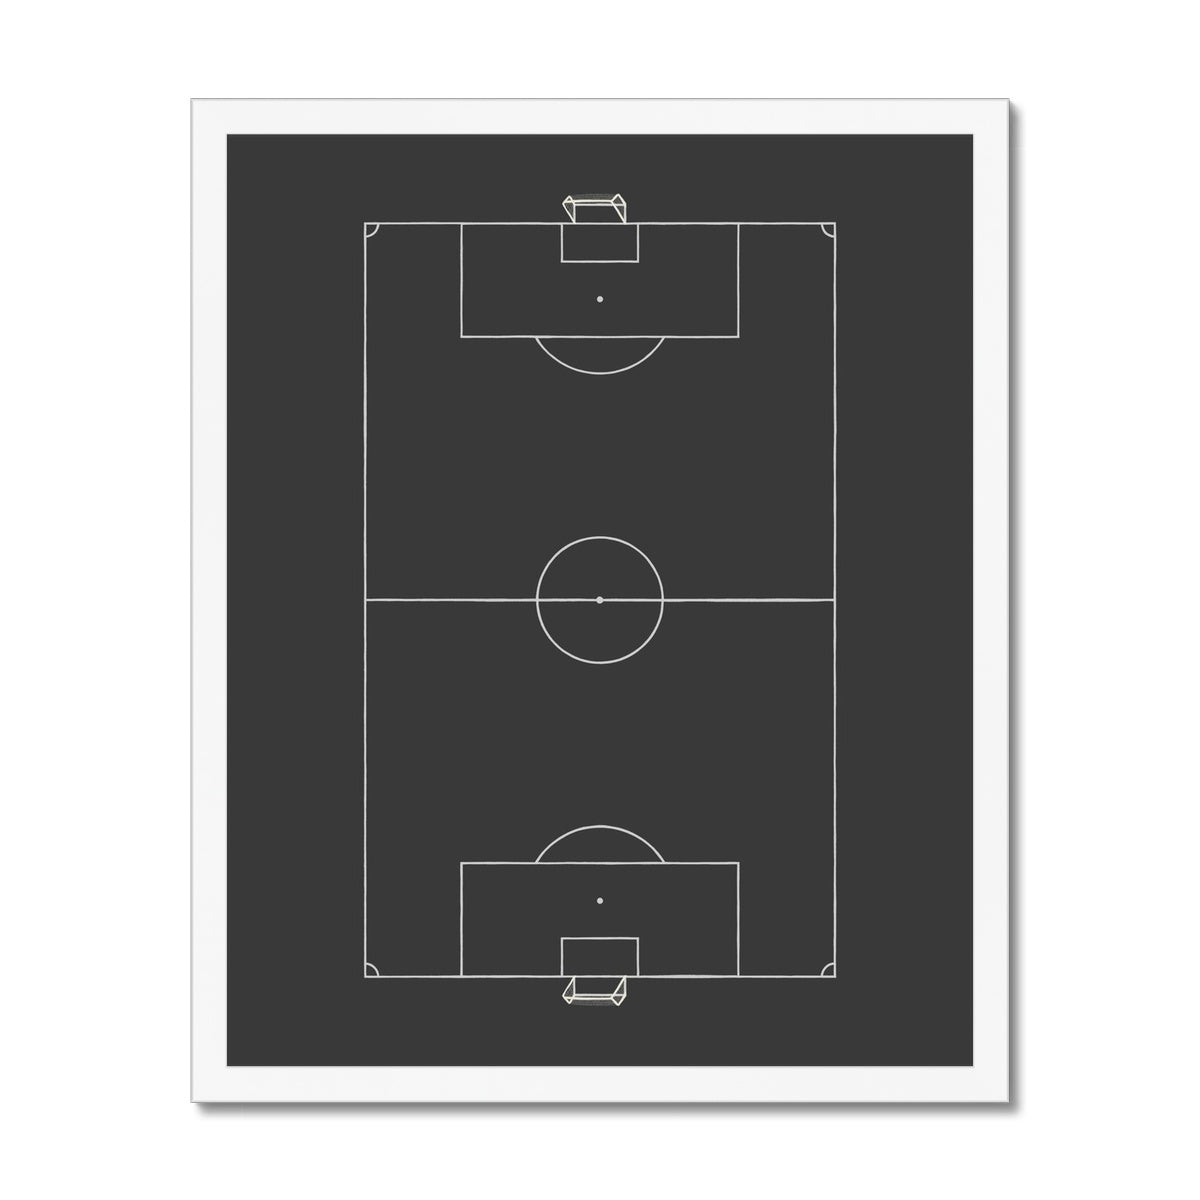 Football pitch in black / Framed Print